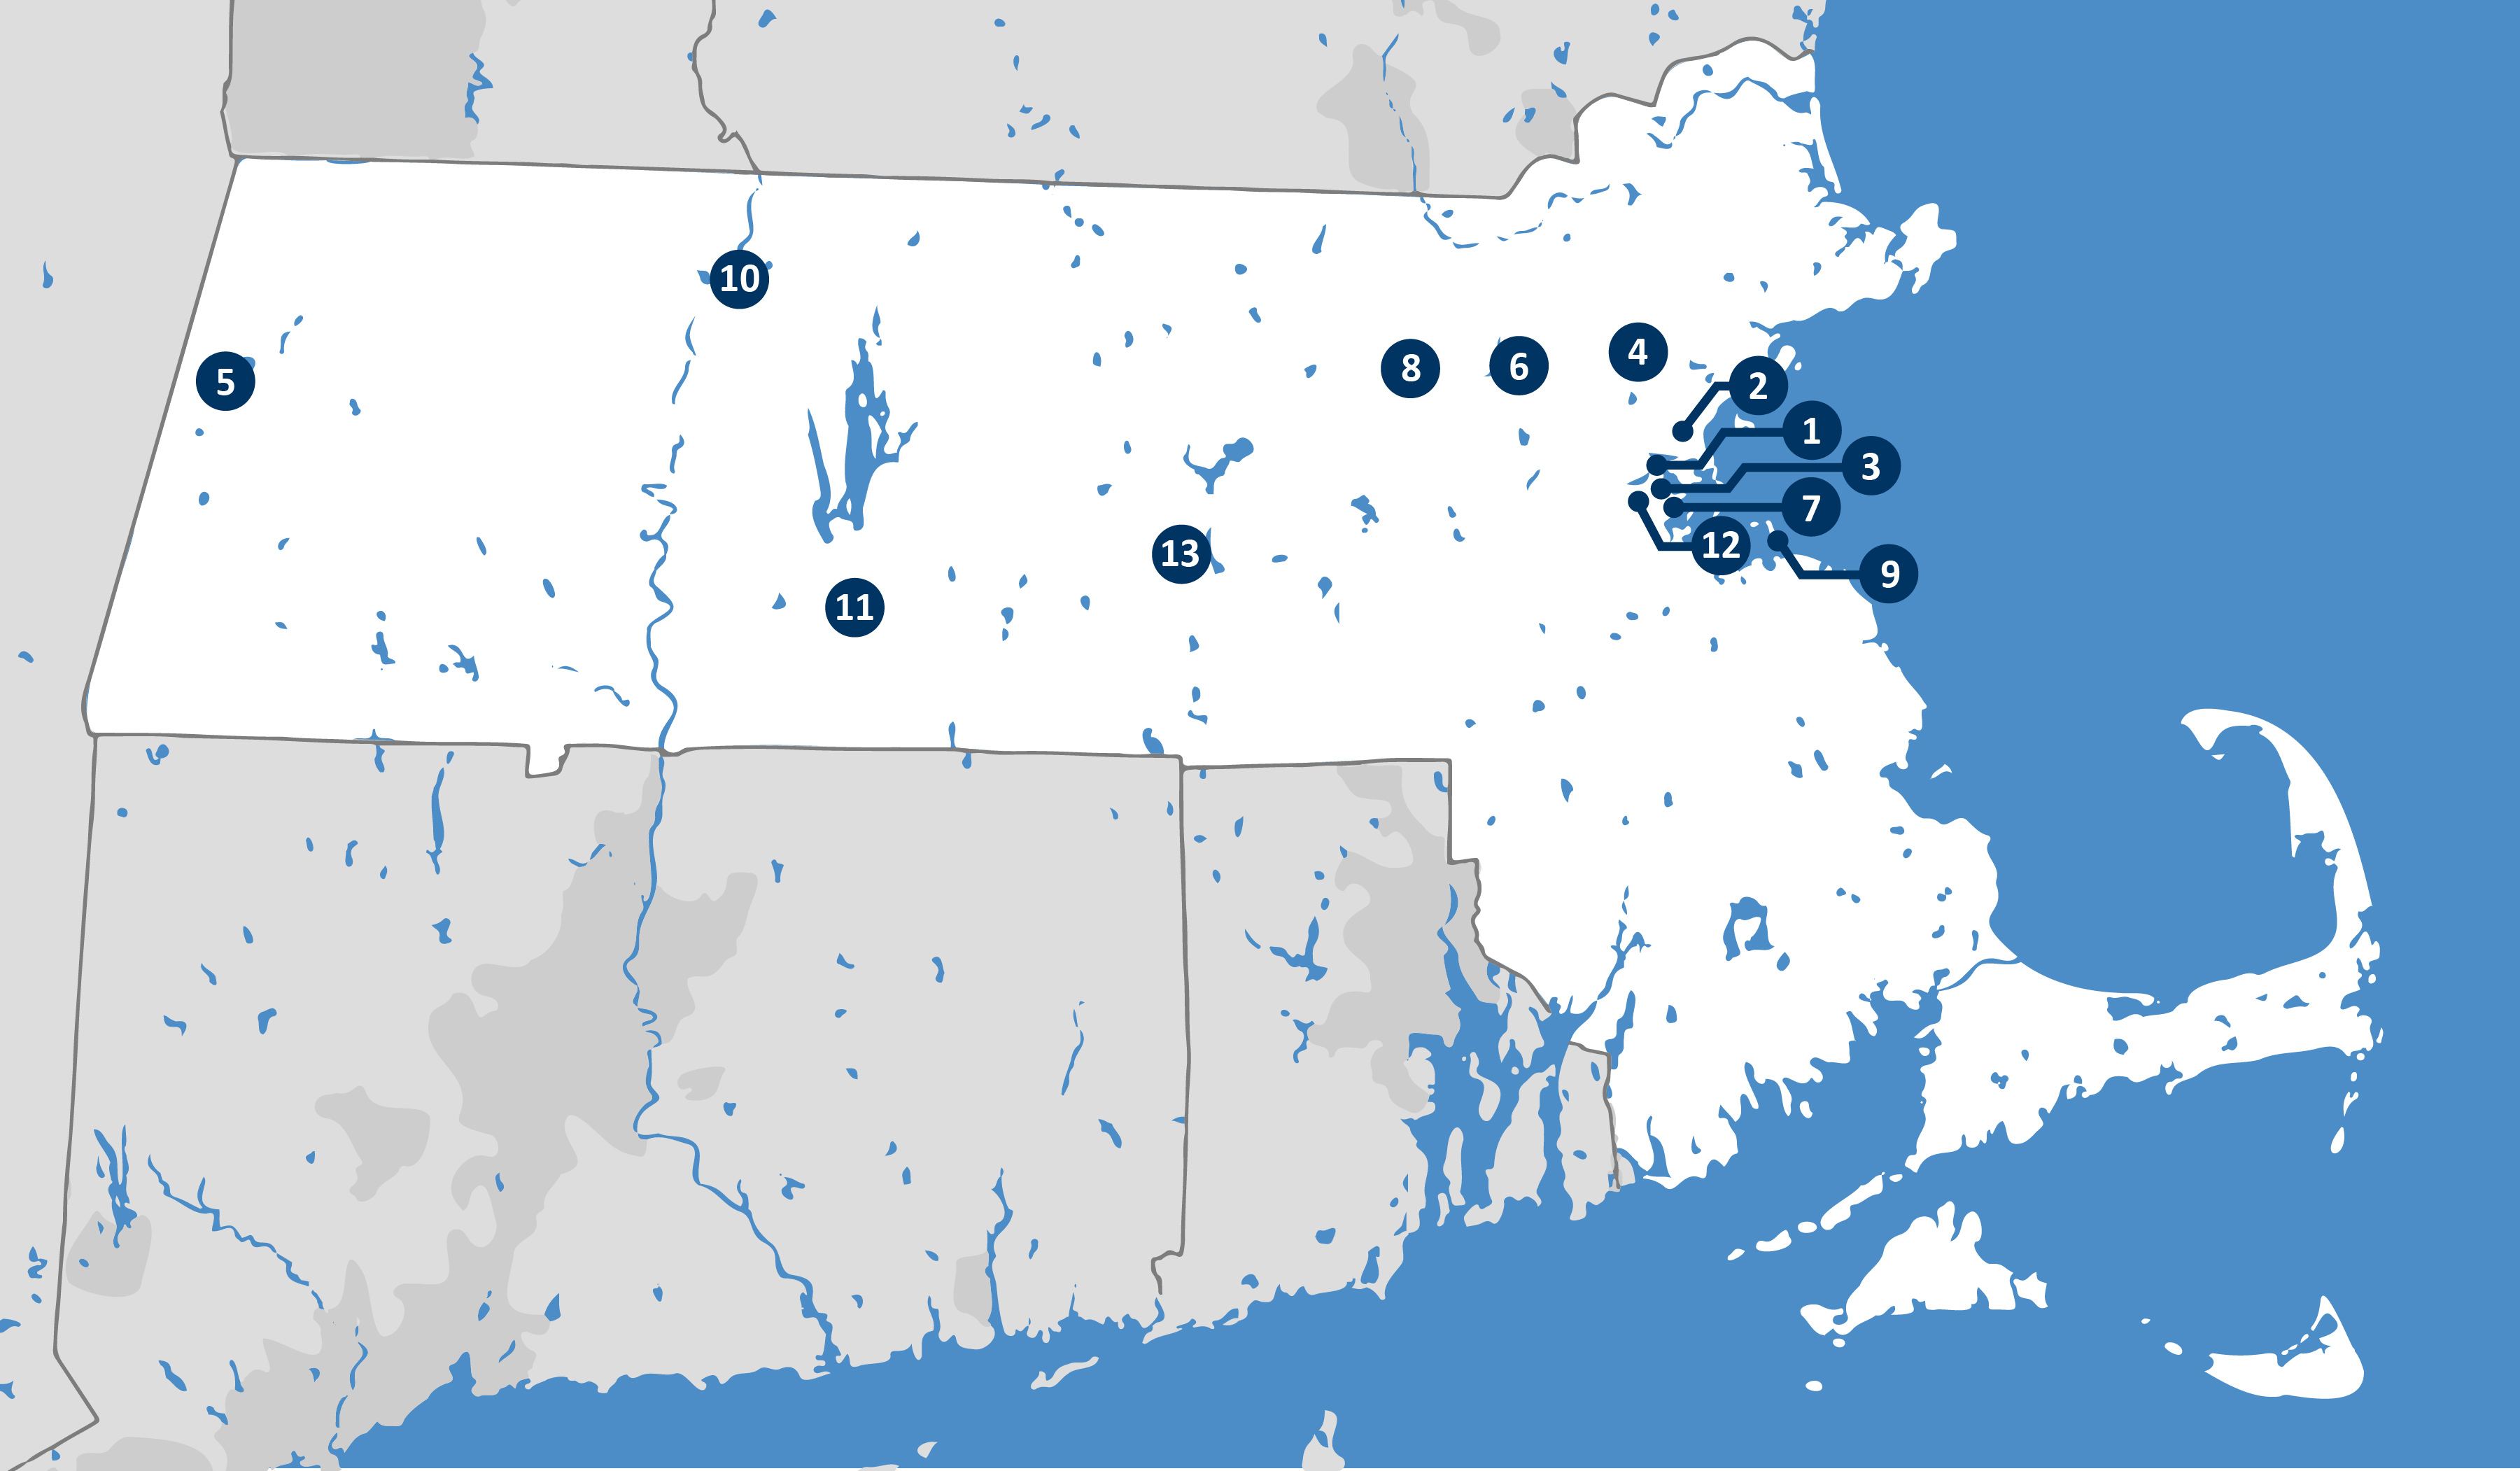 Map of Massachusetts with 13 numbered locations